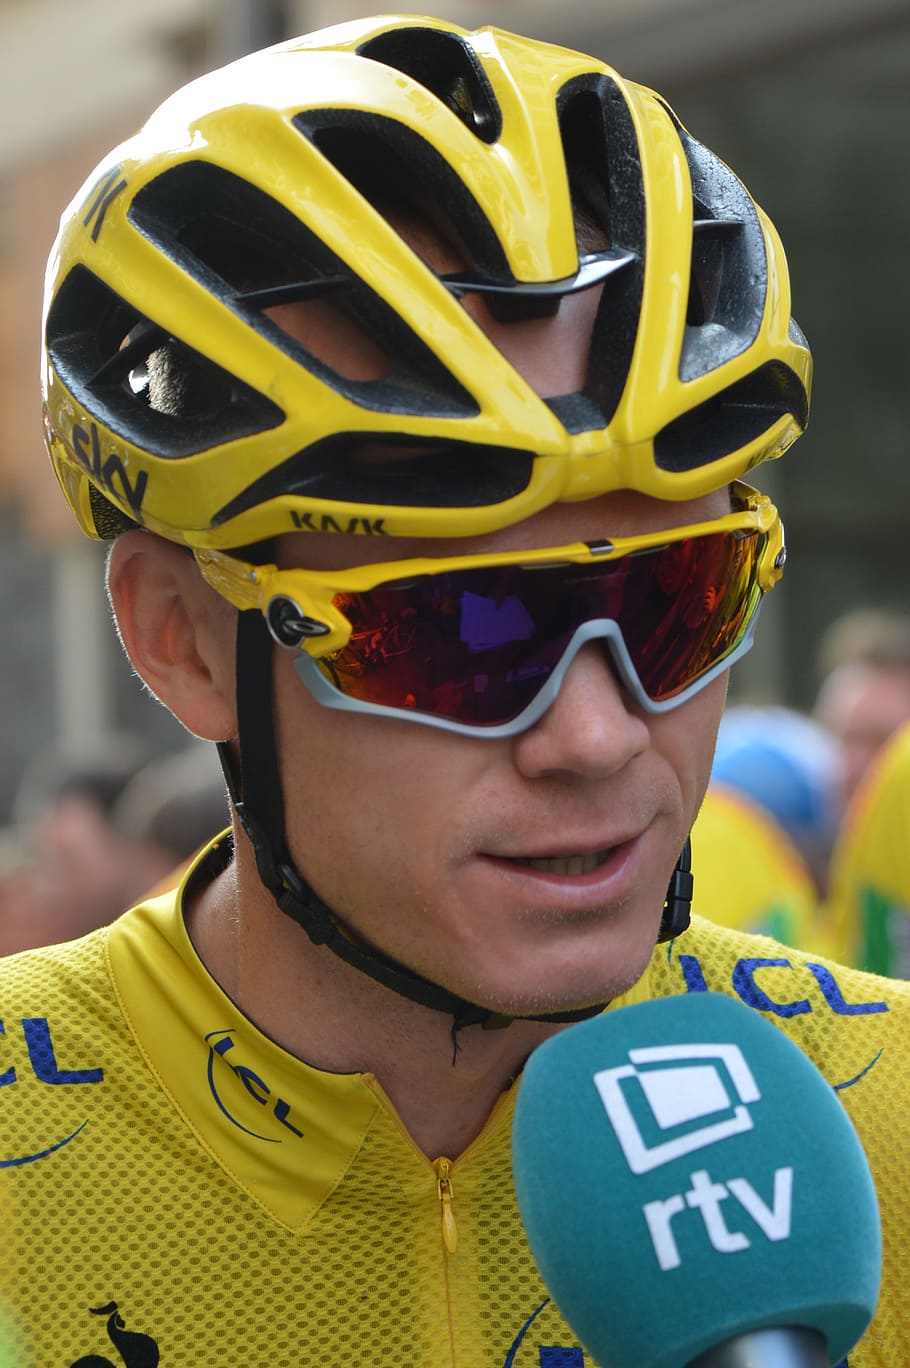 Chris Froome, Champion, Yellow Jersey, celebrity, cyclist, professional road bicycle racer, man, people, winner, interview